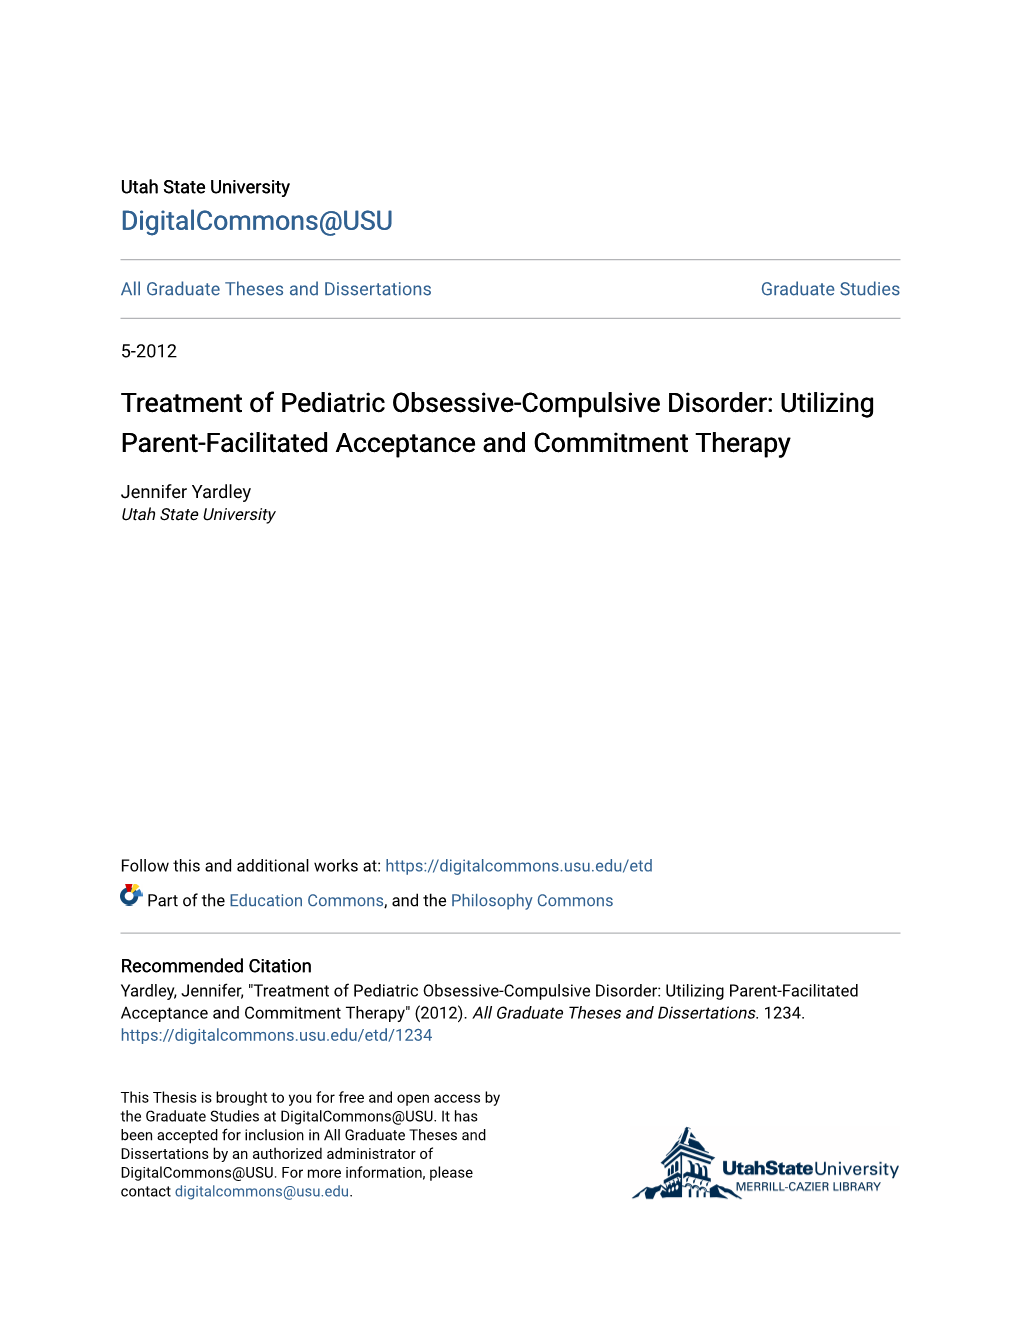 Treatment of Pediatric Obsessive-Compulsive Disorder: Utilizing Parent-Facilitated Acceptance and Commitment Therapy